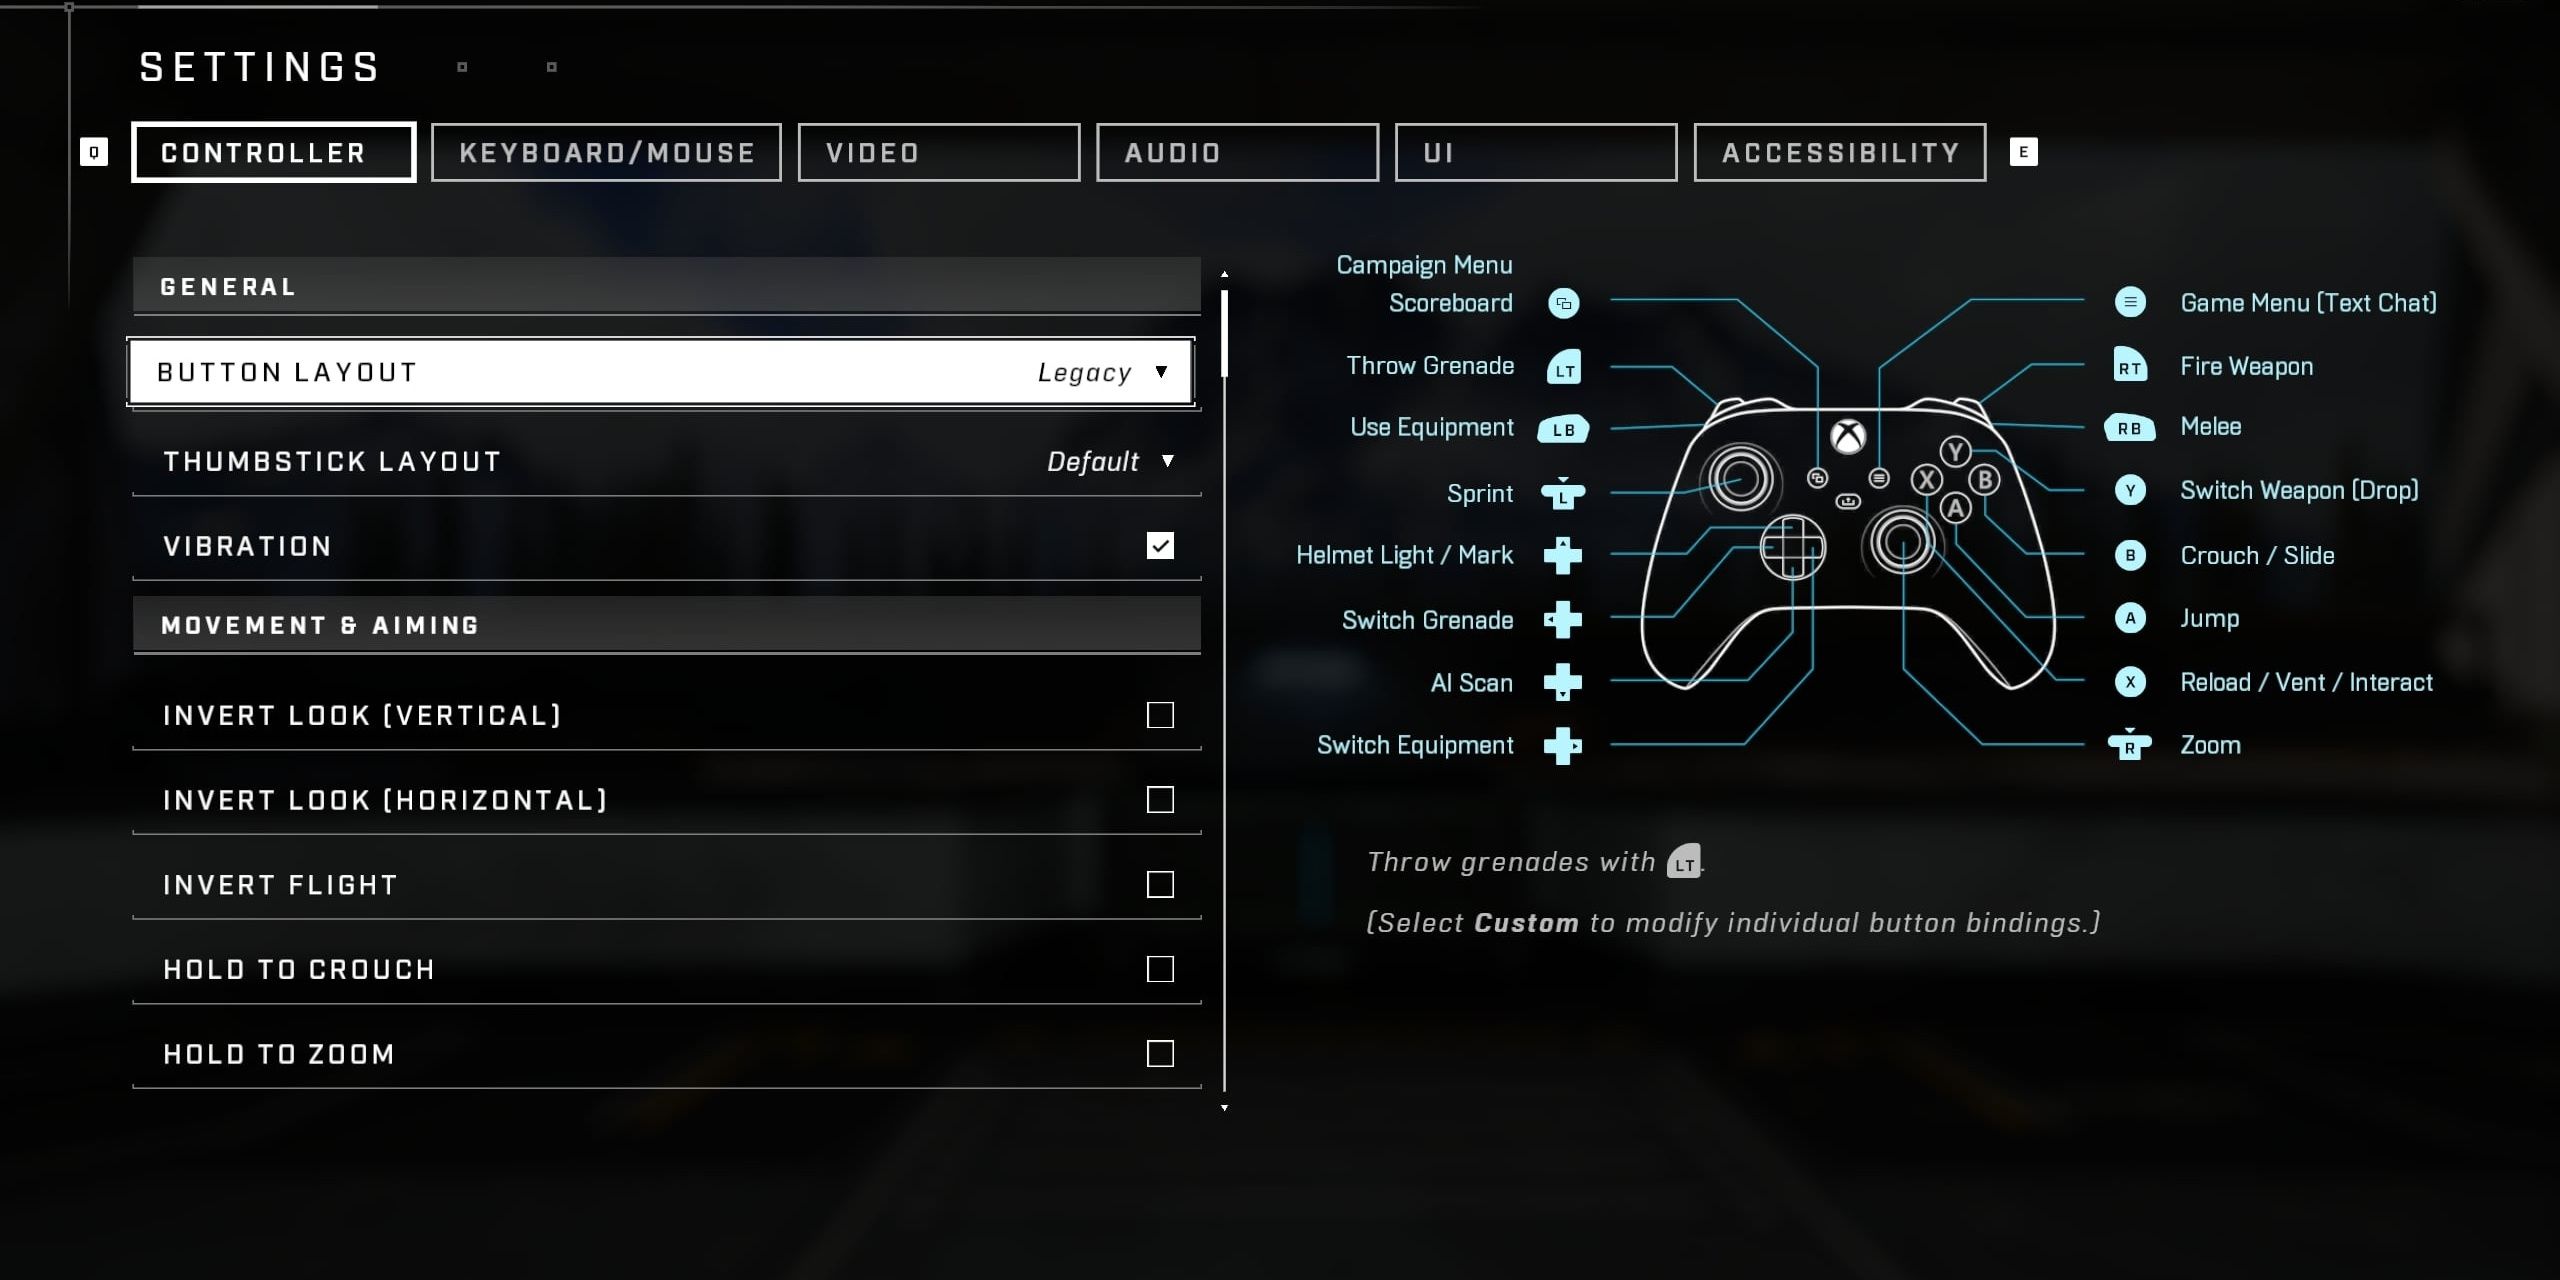 Legacy Button Layout in Halo Infinite